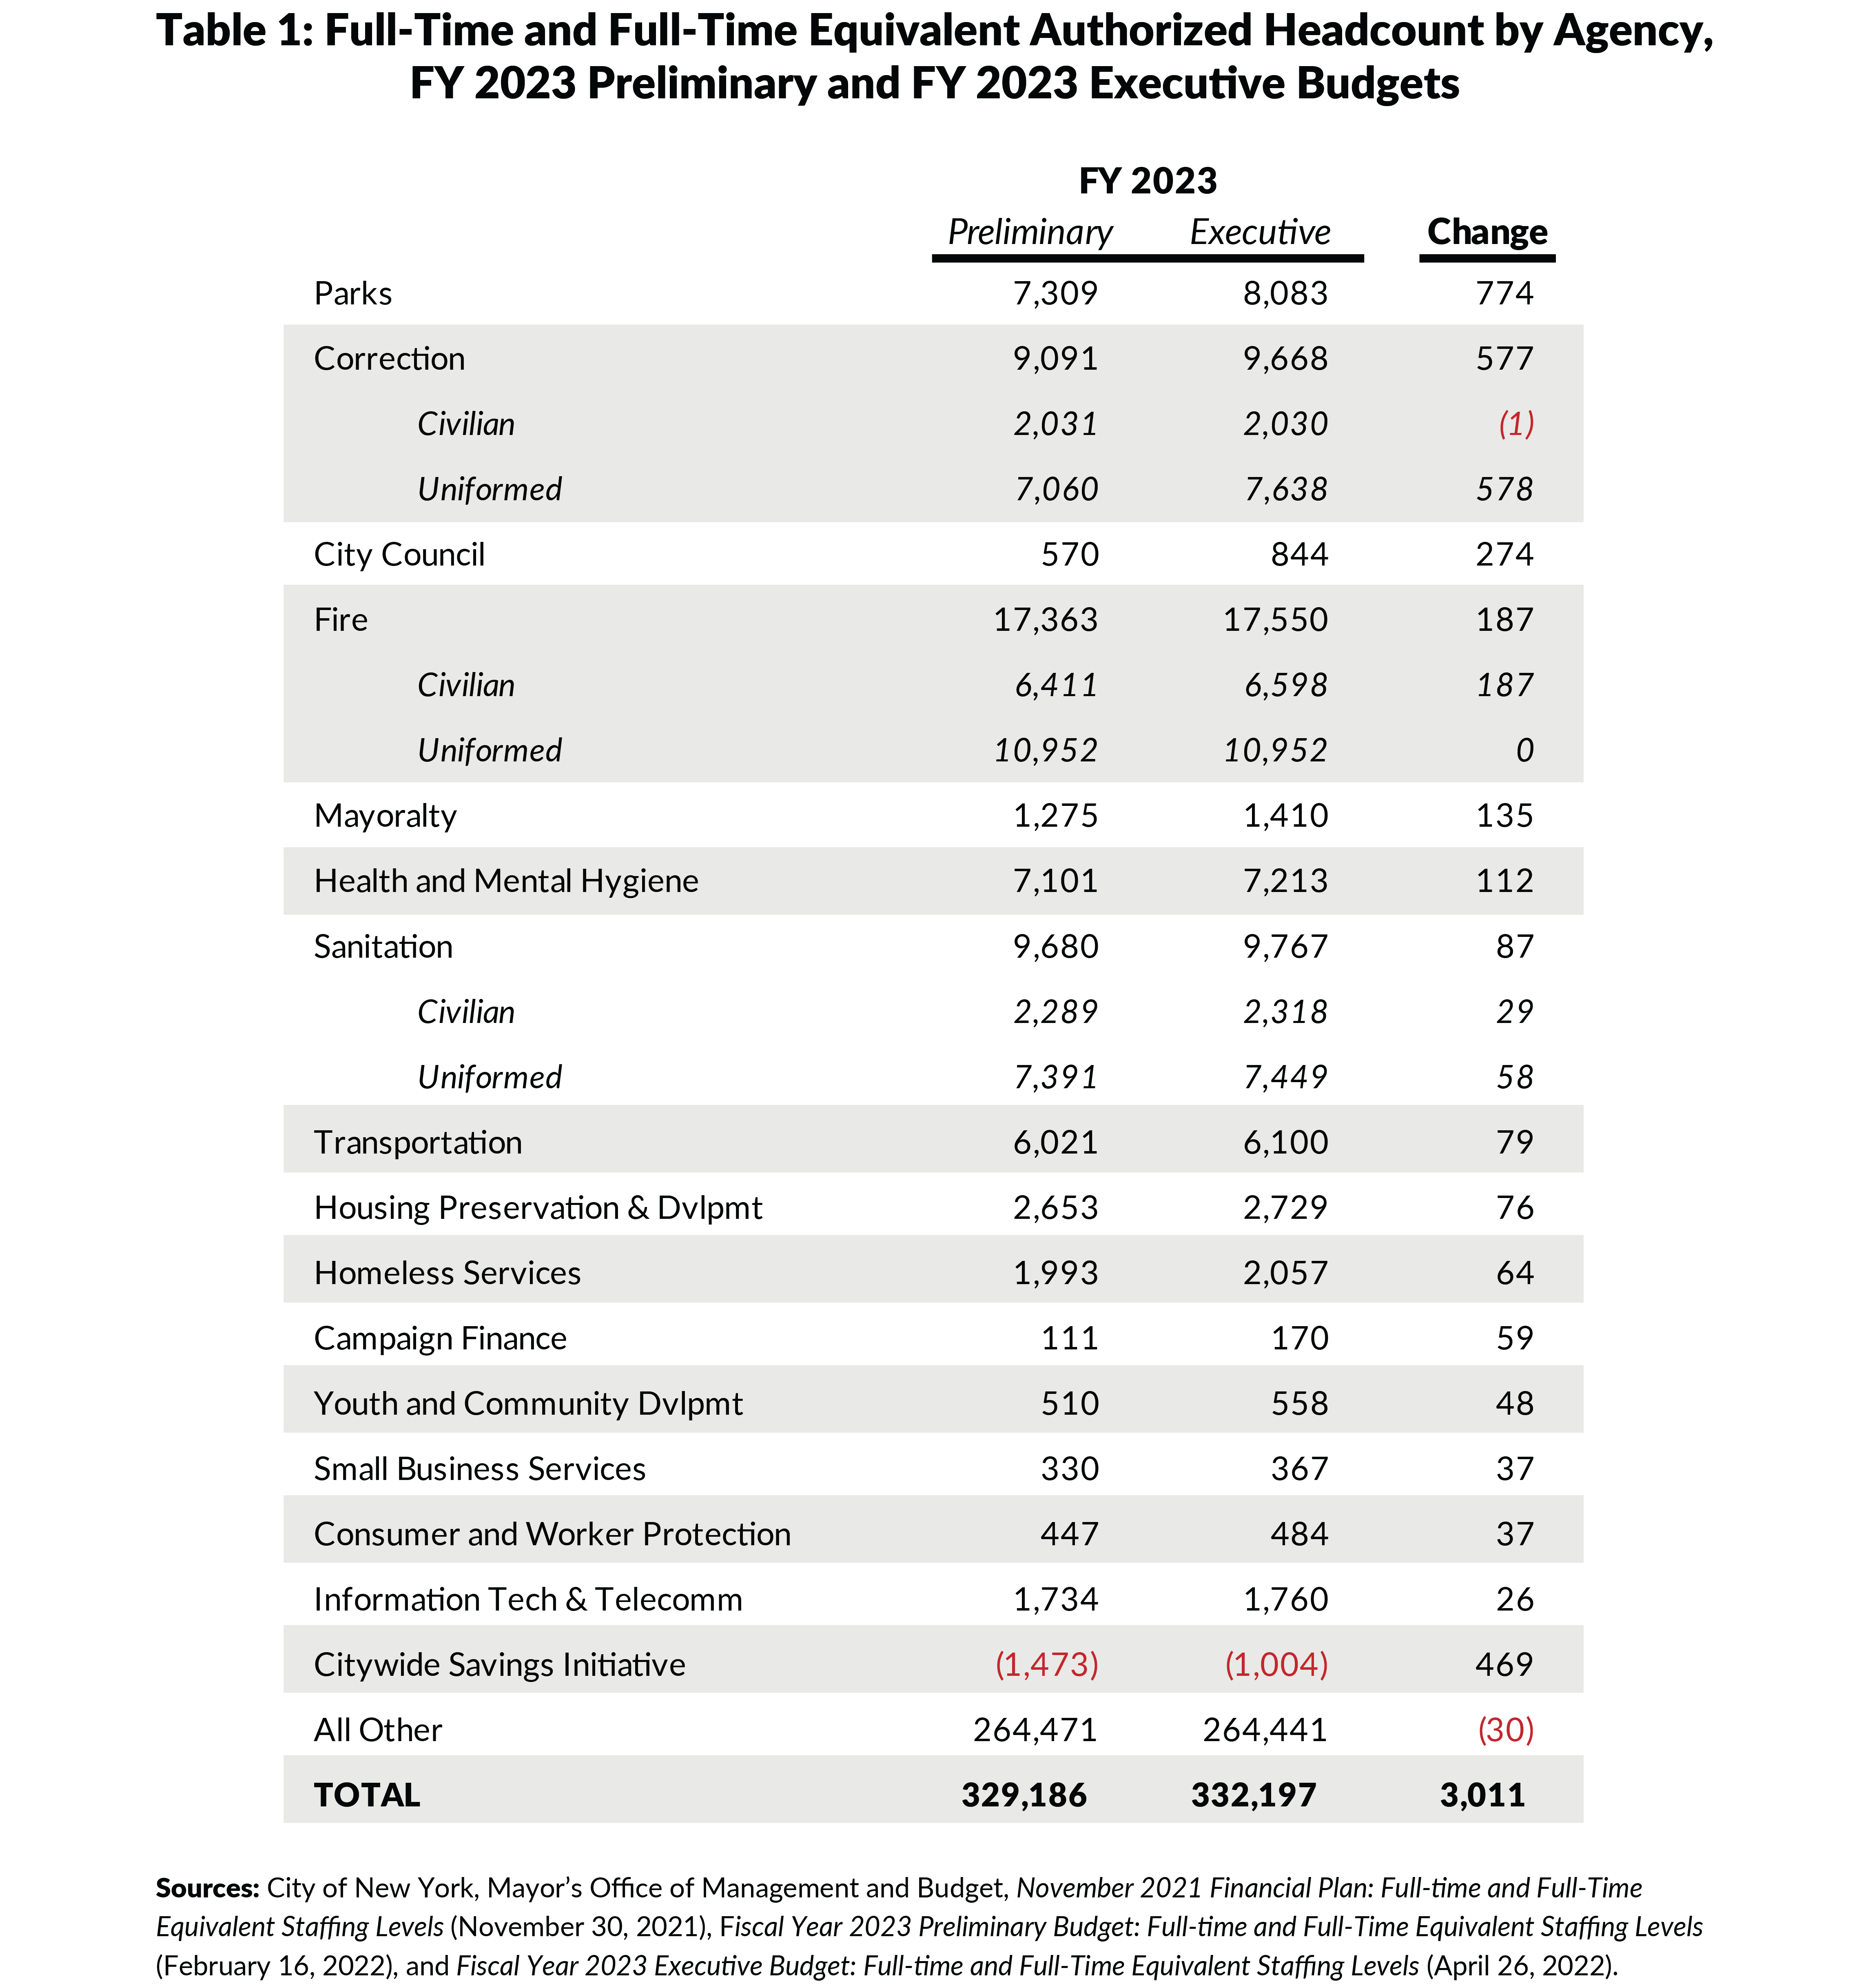 Table 1: Full-Time and Full-Time Equivalent Authorized Headcount by Agency,FY 2023 Preliminary and FY 2023 Executive Budgets